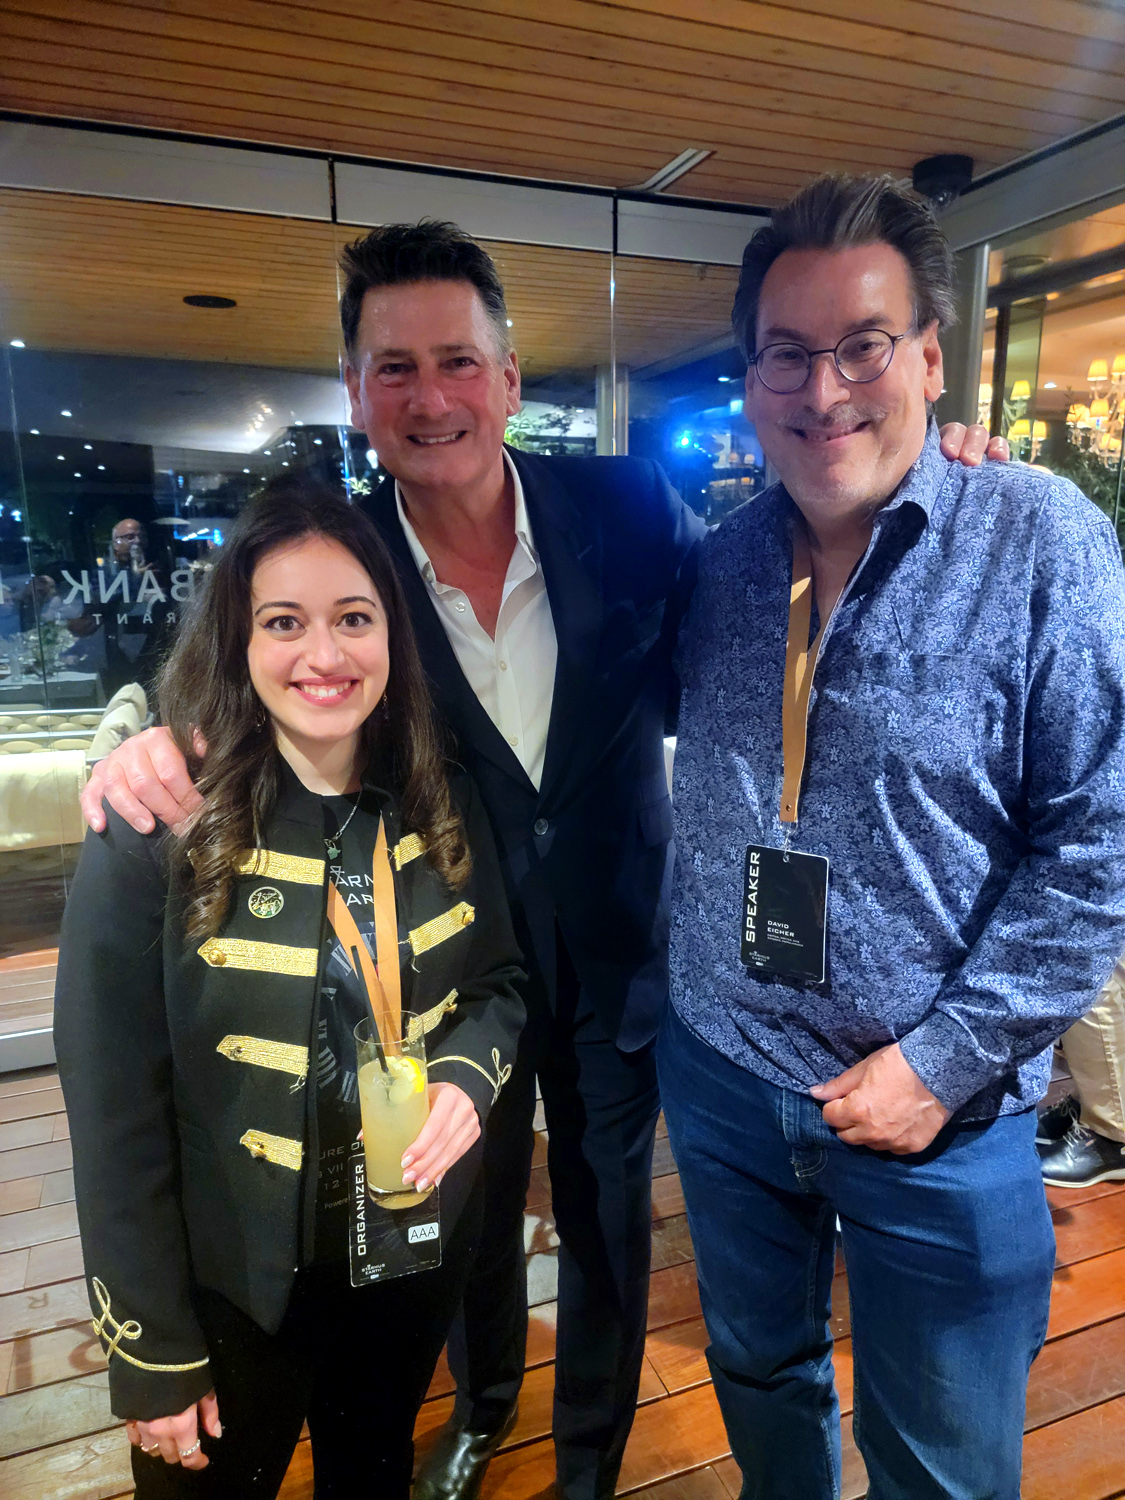 Rock stars aided Starmus with a series of concerts, including the leader and lead singer of Spandau Ballet, Tony Hadley, seen here with Maria Friargiu and Dave Eicher. Credit: David J. Eicher.